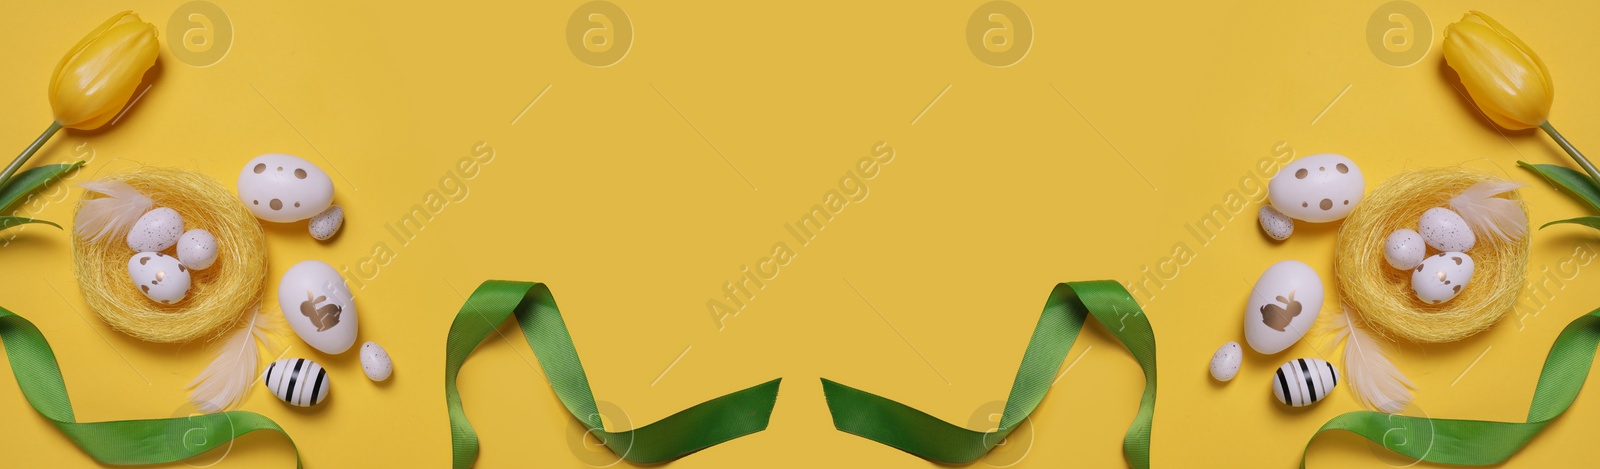 Image of Flat lay composition with decorated Easter eggs and flowers on yellow background, space for text. Banner design